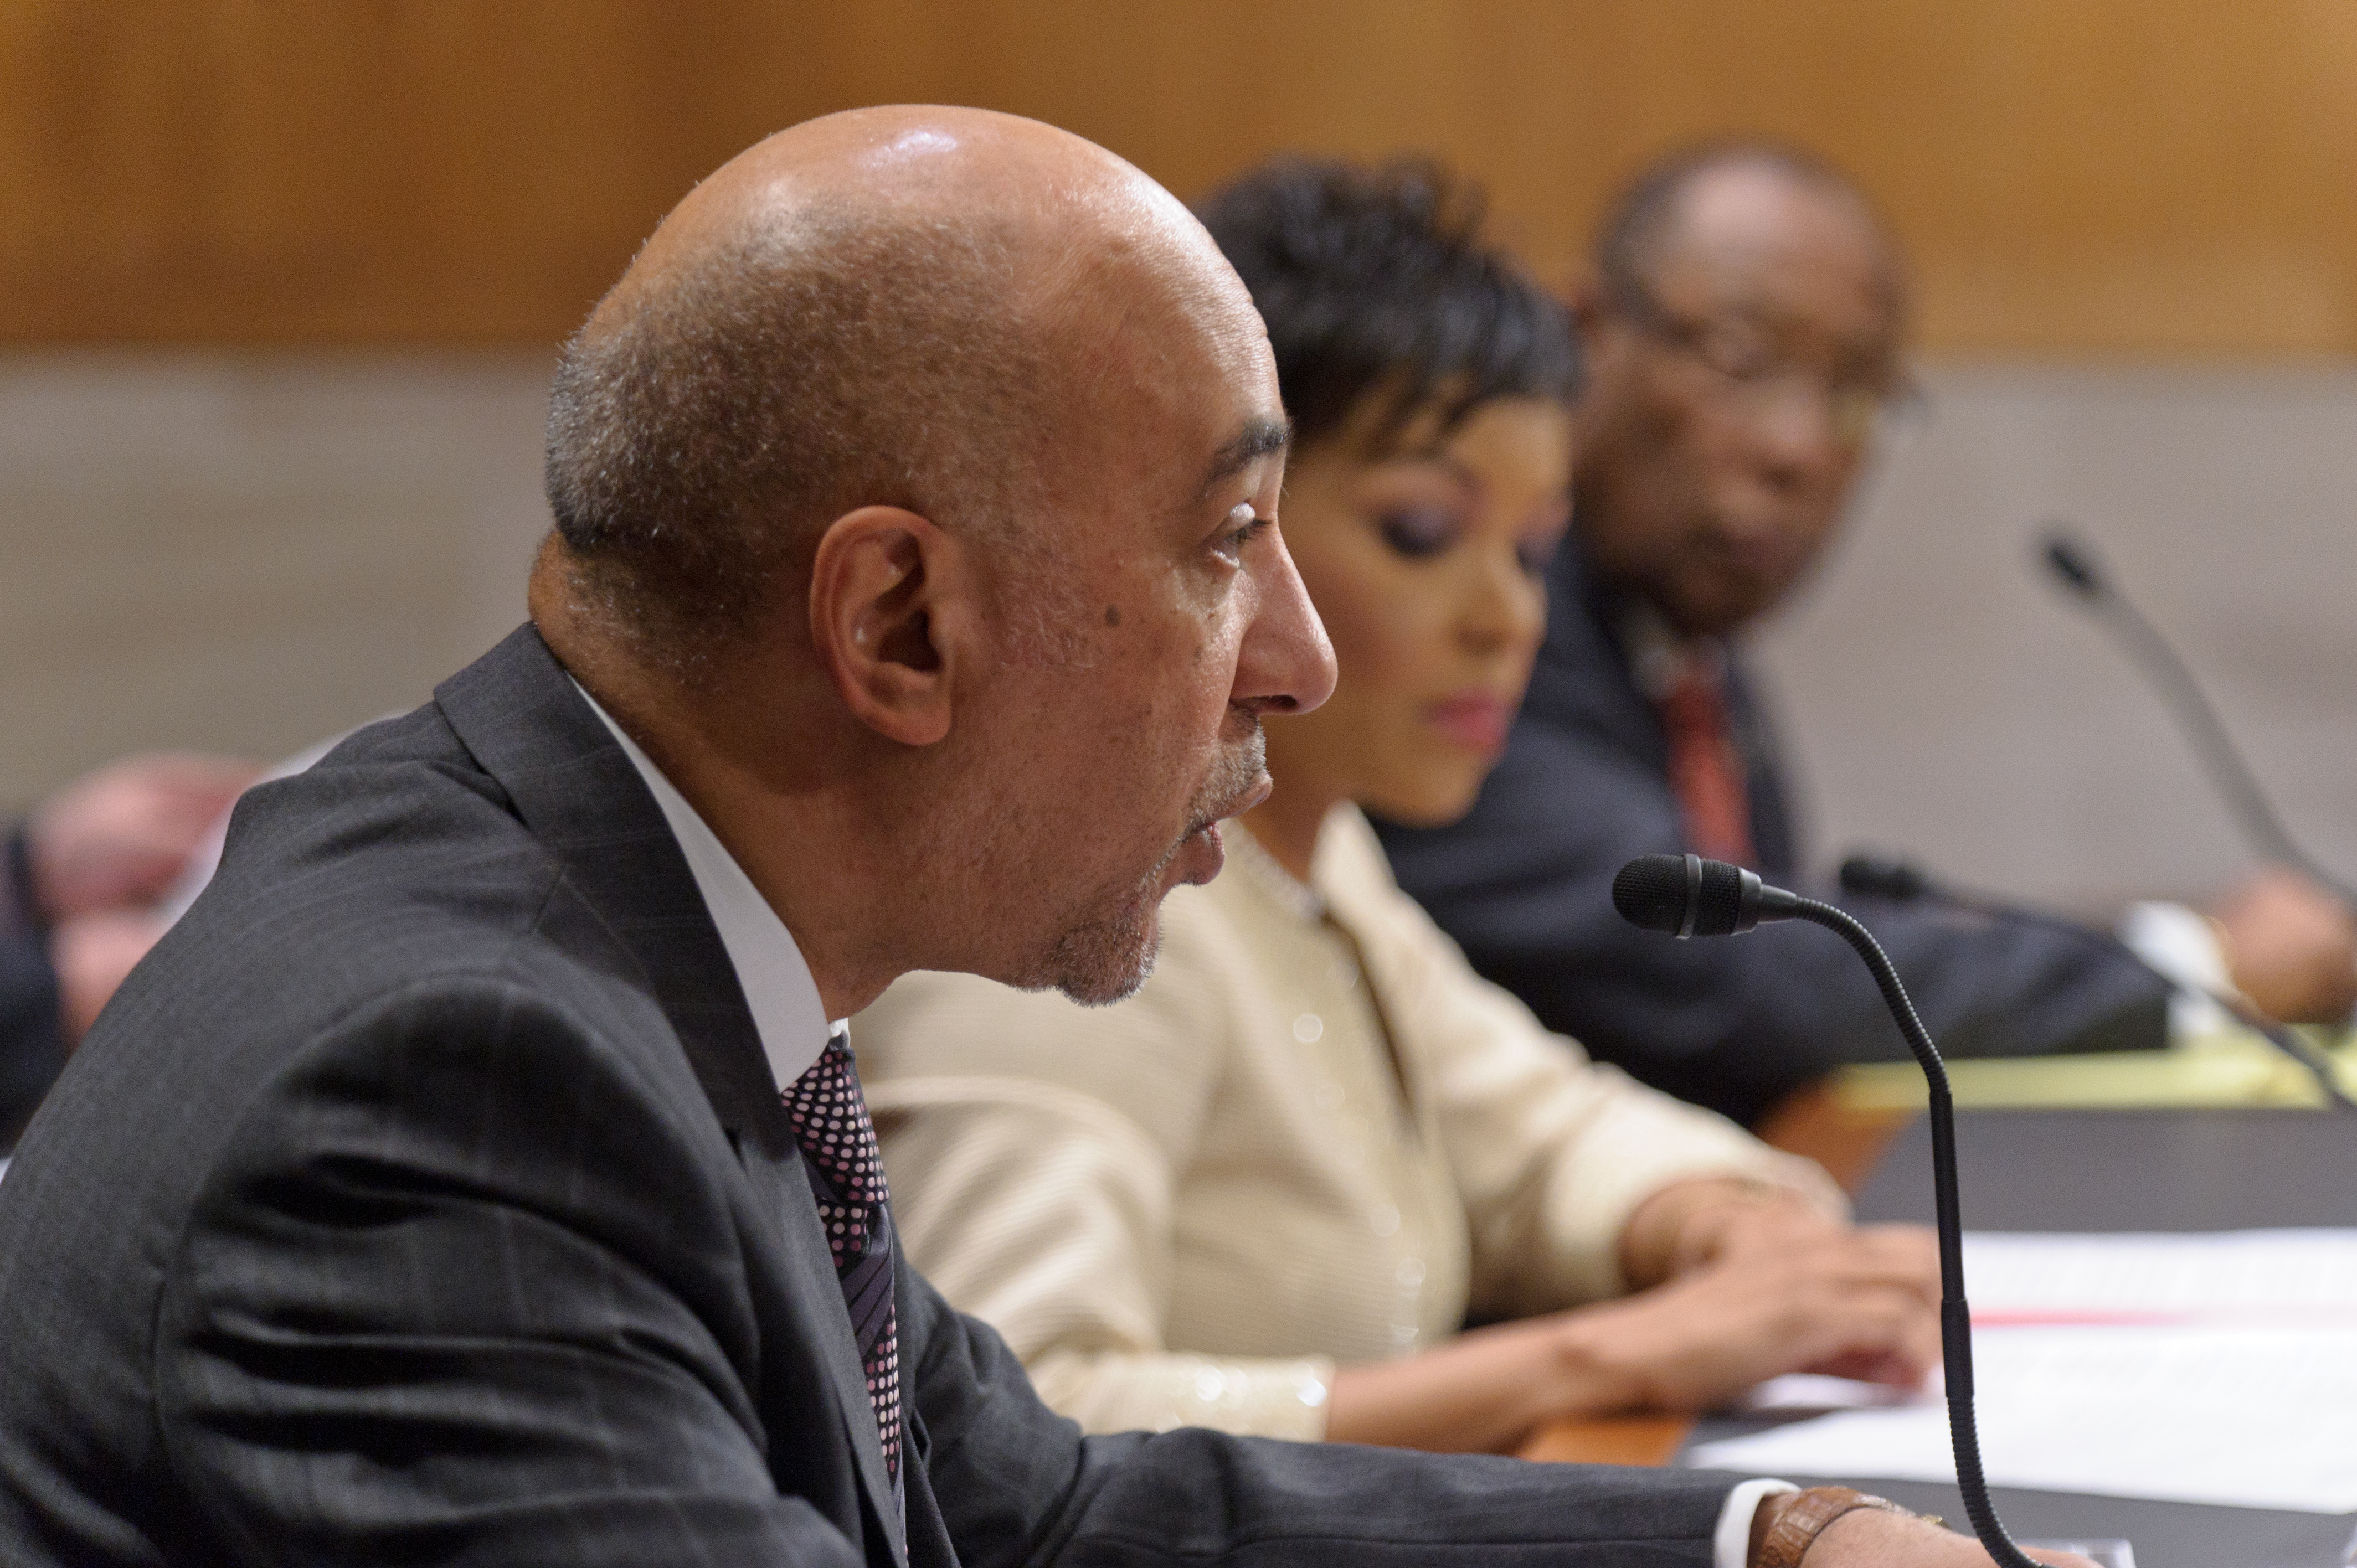 Ambassadors Anibal de Castro (Dominican Republic), Audrey Marks (Jamaica), and Cornelius Smith (The Bahamas) testify at a February 1, 2012, hearing on U.S.-Caribbean Security Cooperation.